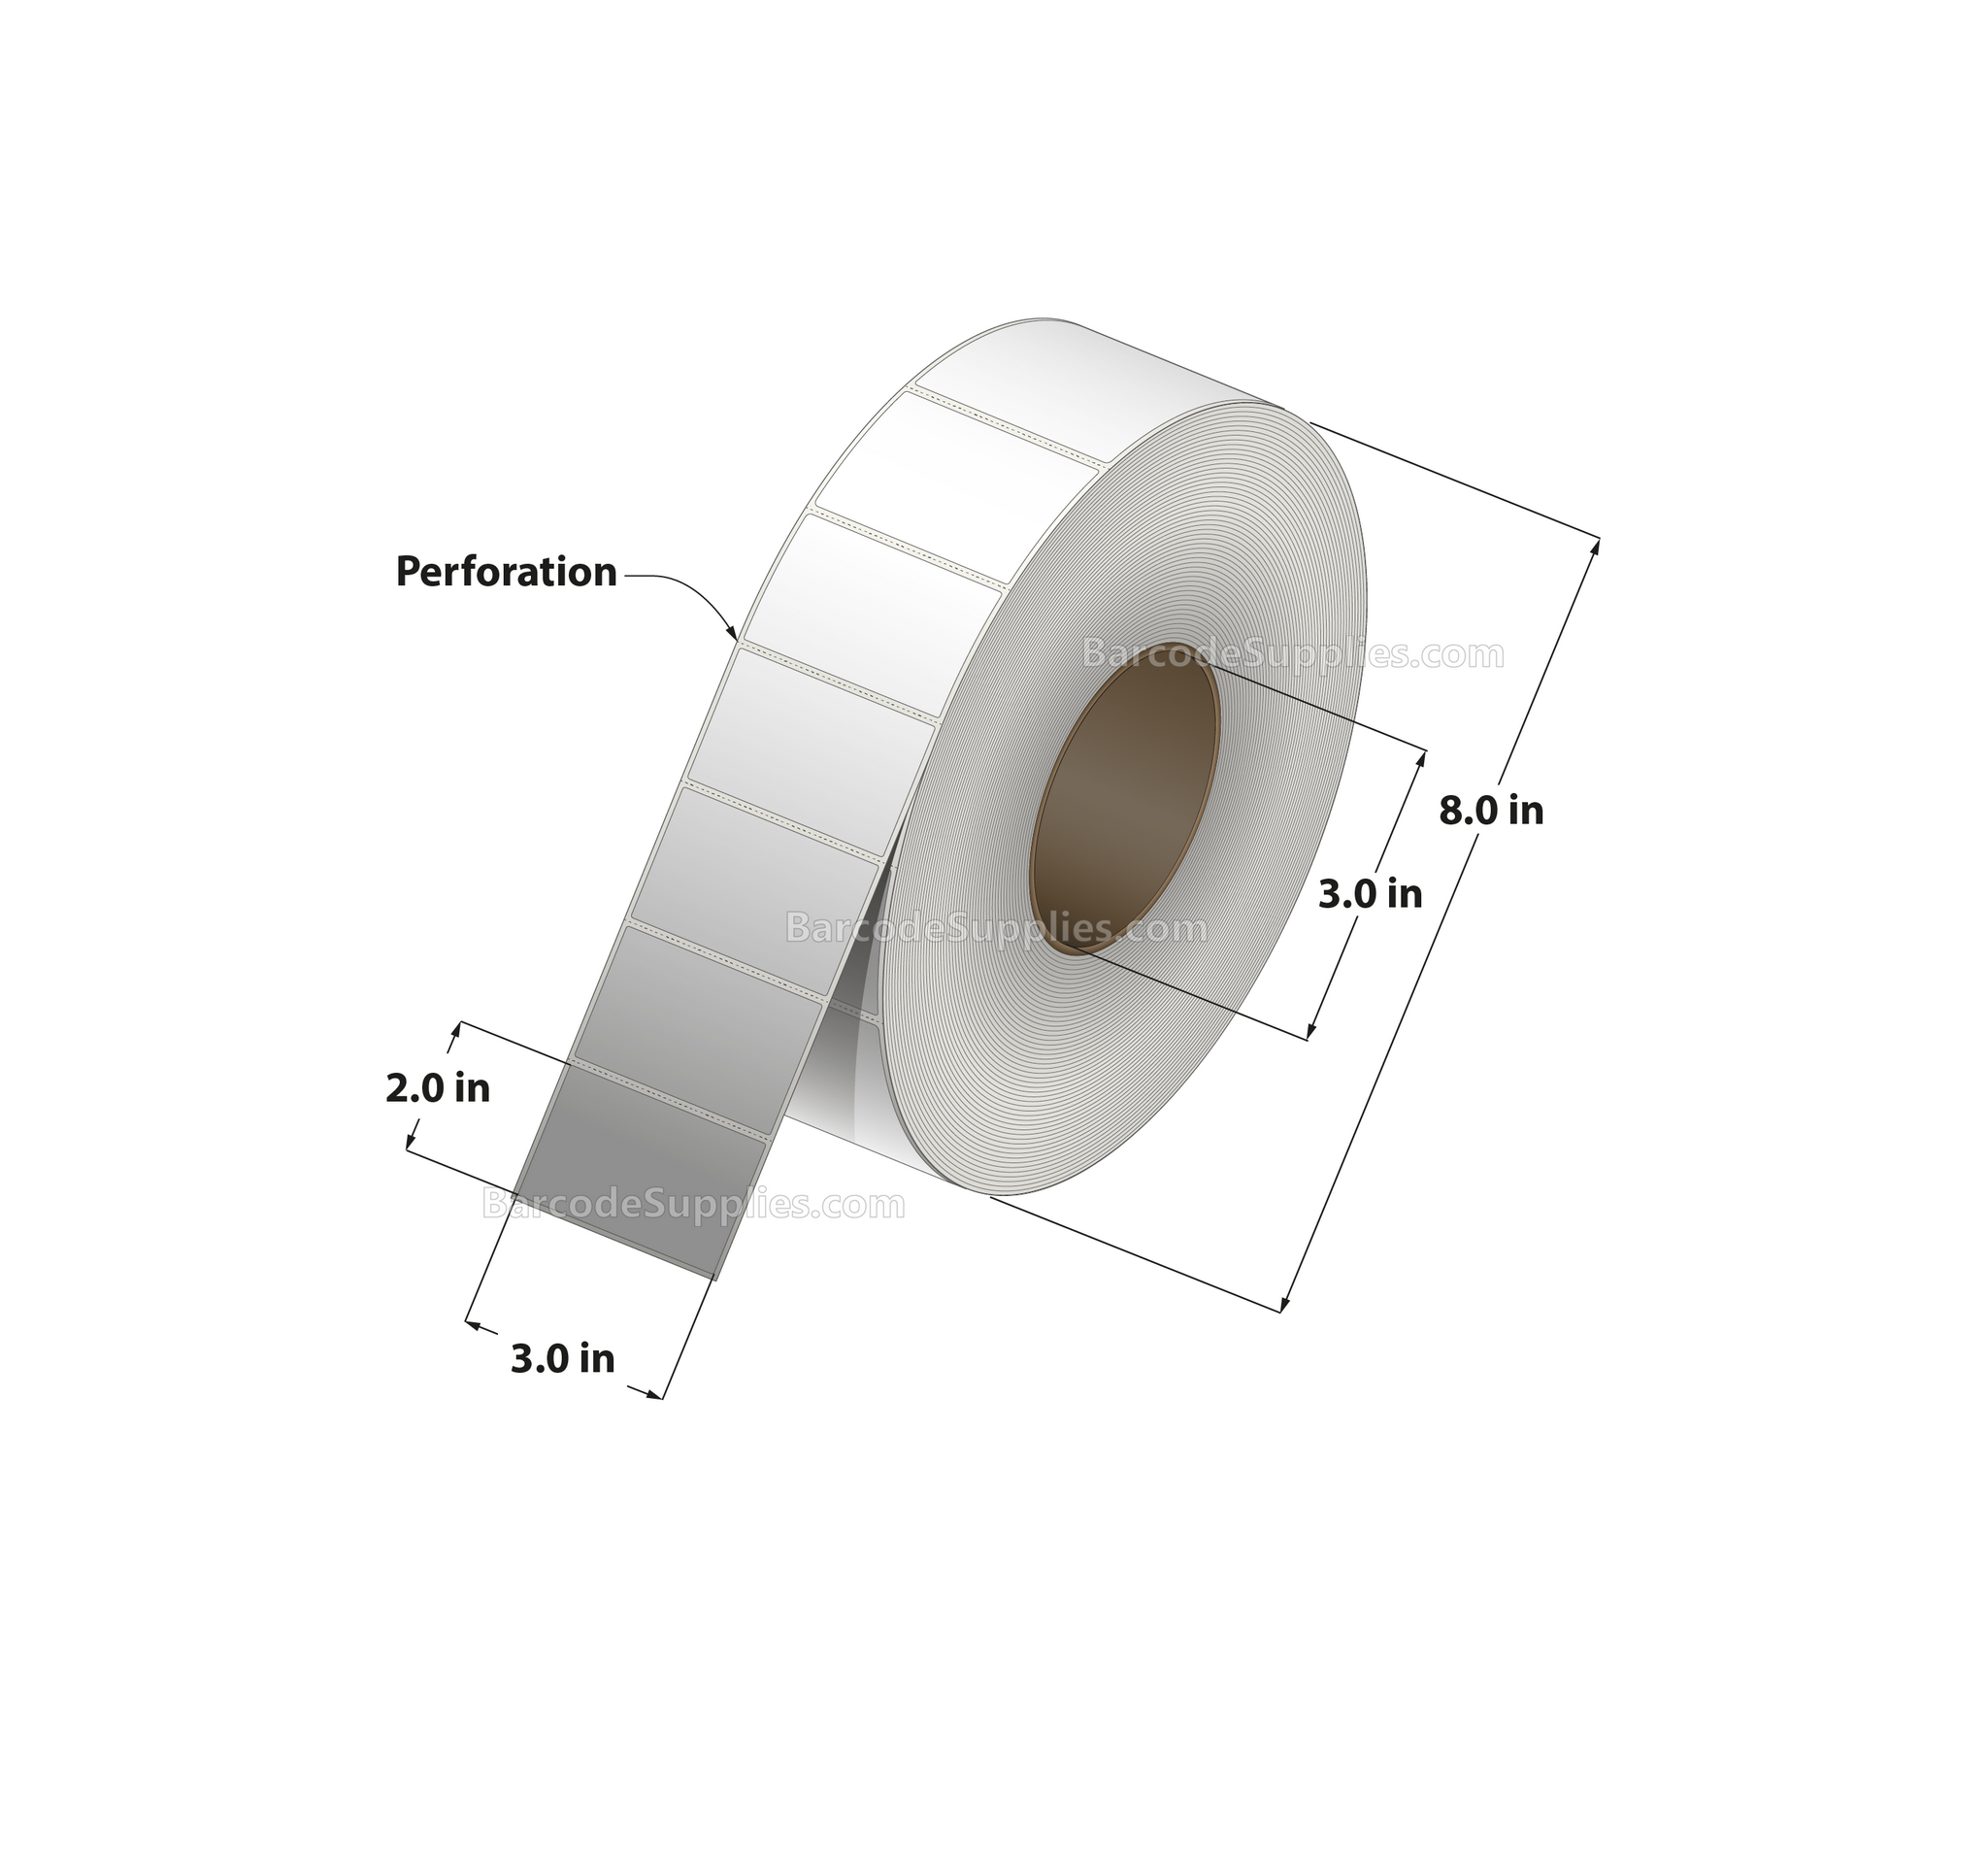 3 x 2 Direct Thermal White Labels With Permanent Acrylic Adhesive - Perforated - 2900 Labels Per Roll - Carton Of 8 Rolls - 23200 Labels Total - MPN: DT32-1P